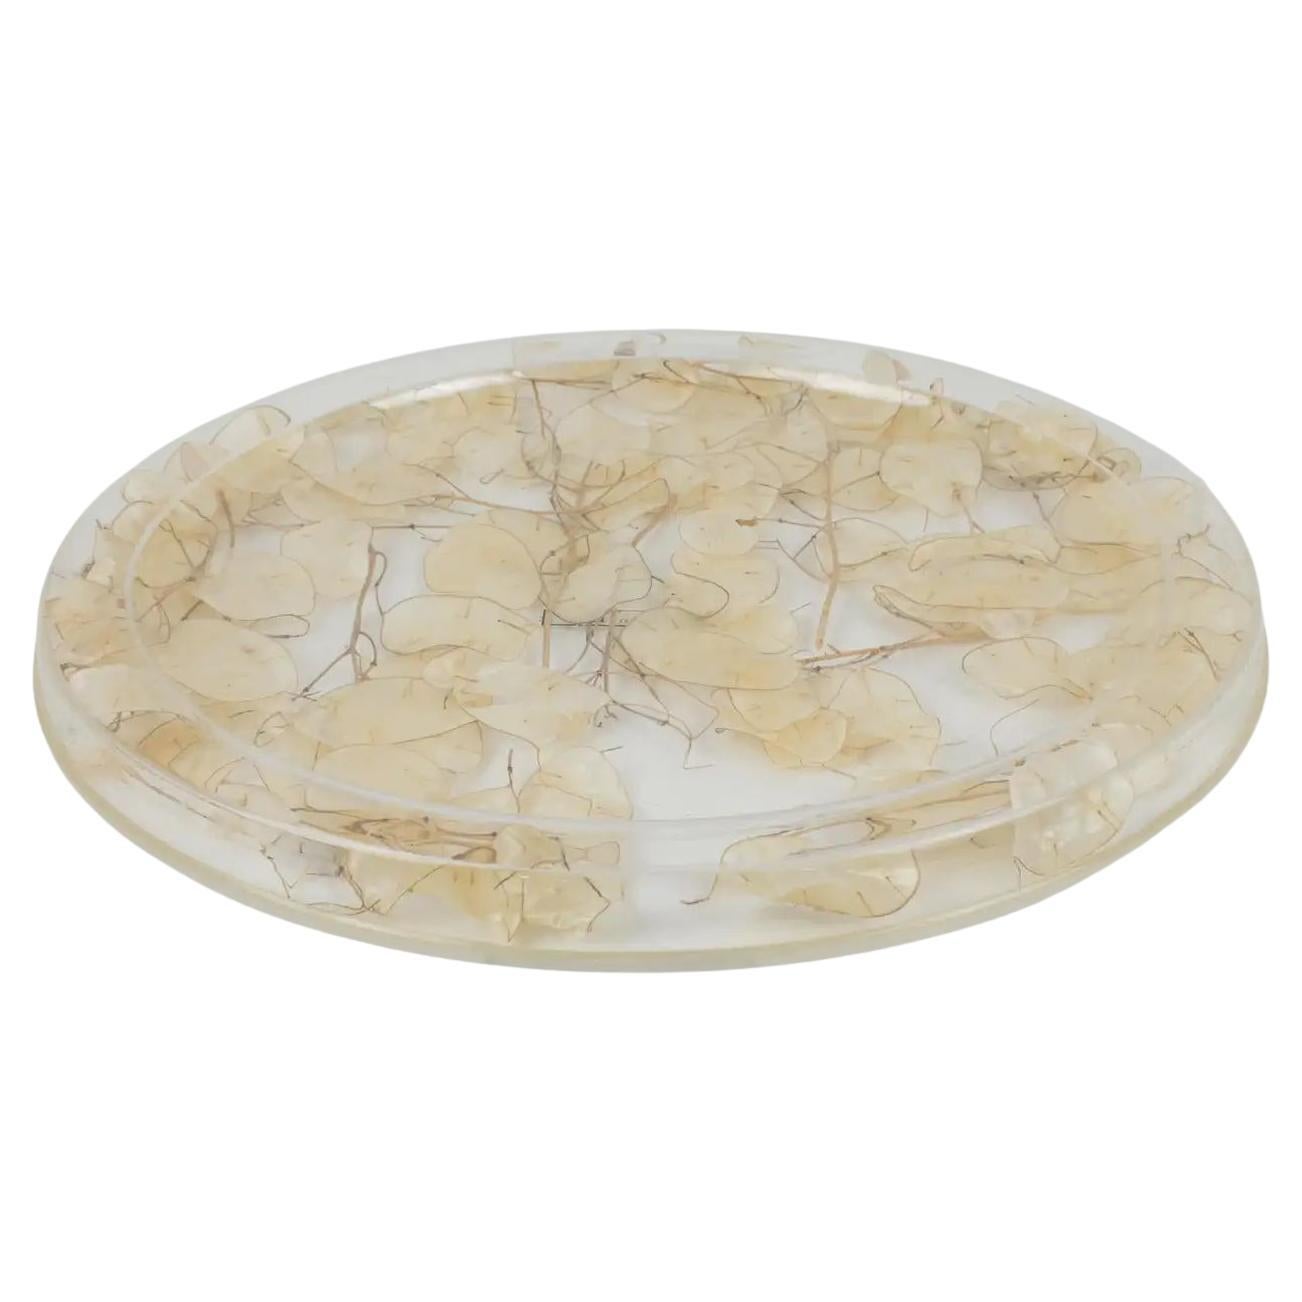 Christian Dior Home Collection Lucite Tray Board Platter with Dried Lunaria For Sale